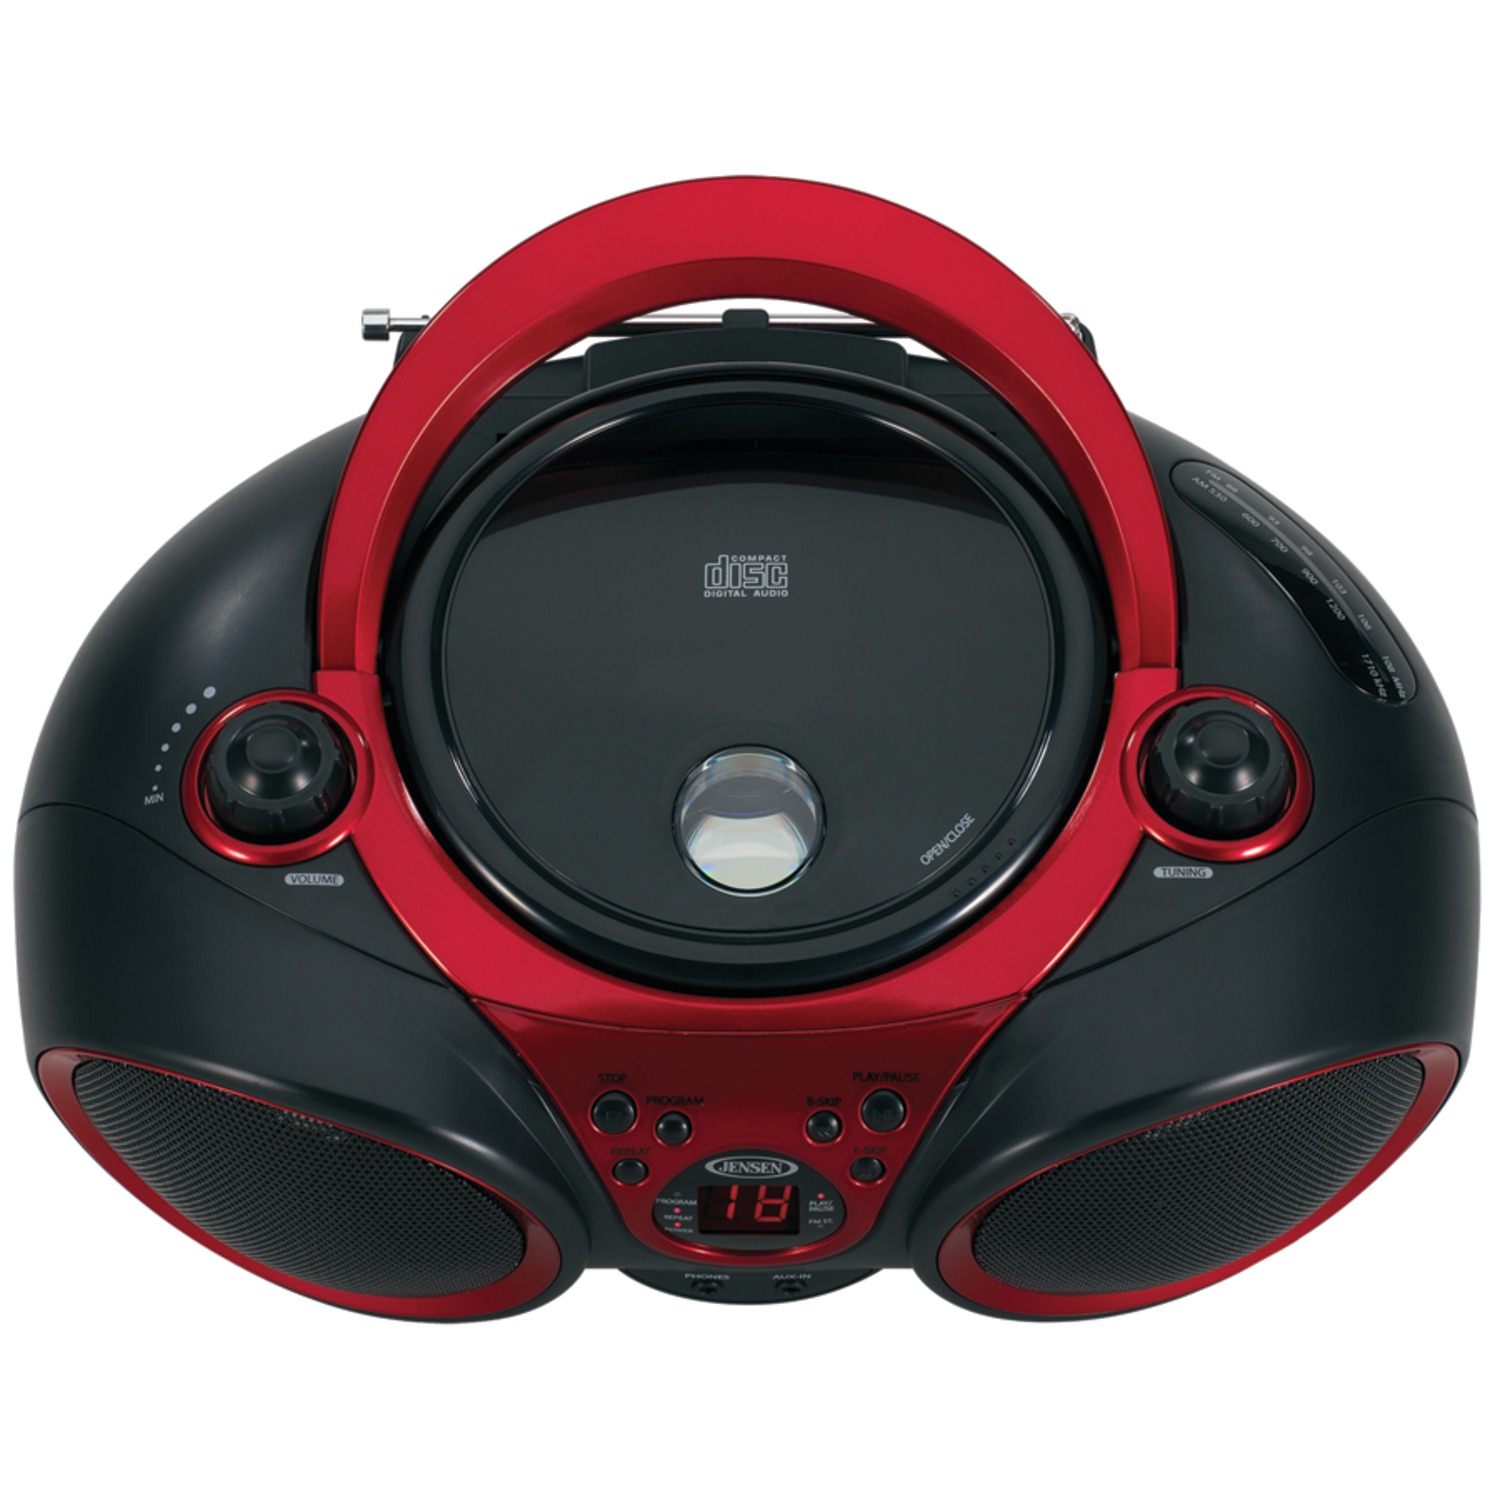 Jensen 3-Watt RMS Portable Stereo CD Player with AM/FM Stereo Radio (Red) - image 4 of 6